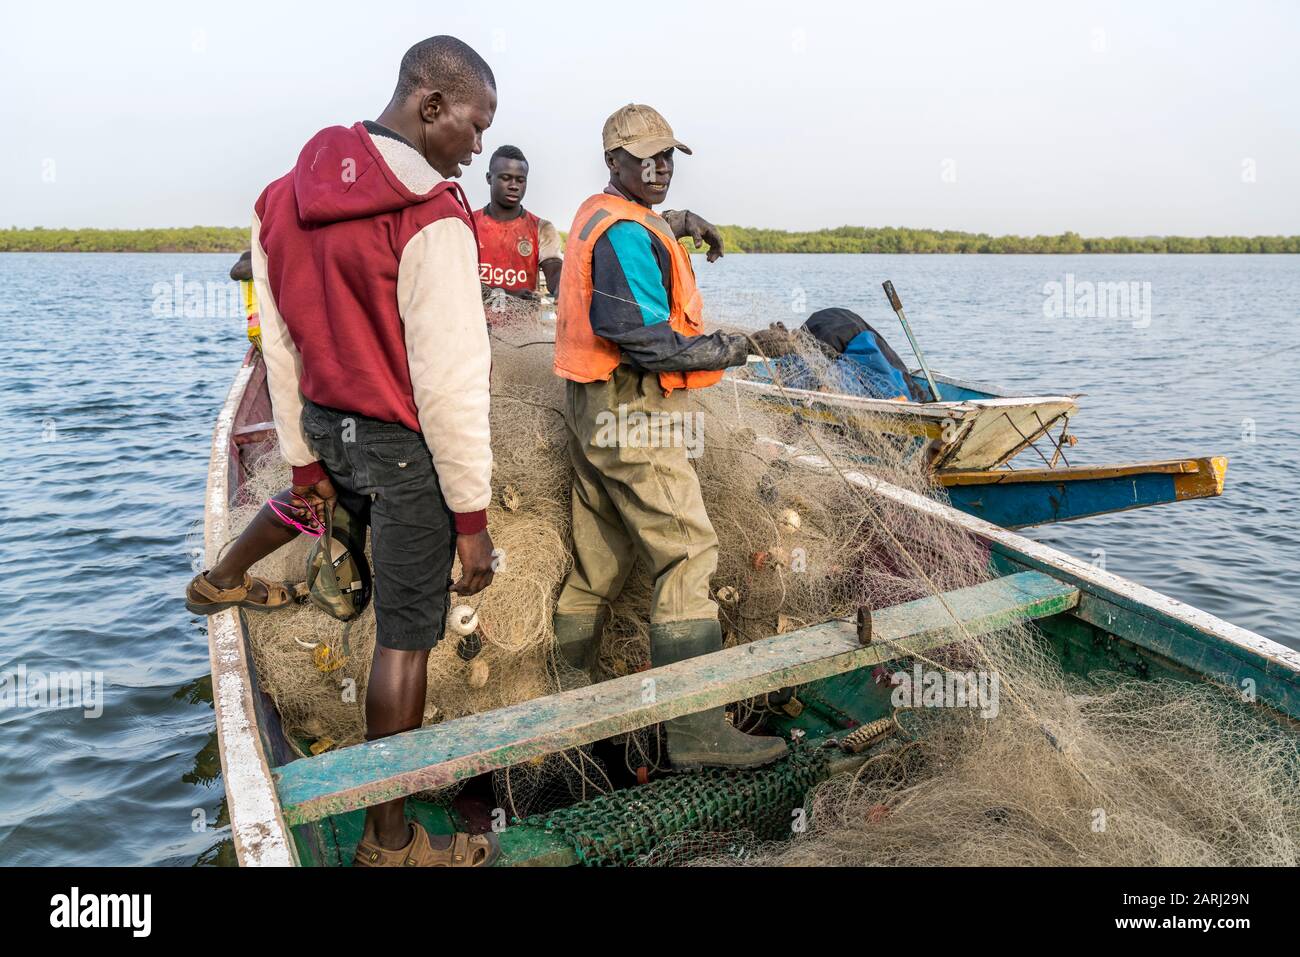 Fischer mit Netz in Ihrem Boot am Flussufer, Insel Jinack Island, Gambia, Westafrika  |  fishermen with net on their boat at the river shore, Jinack I Stock Photo